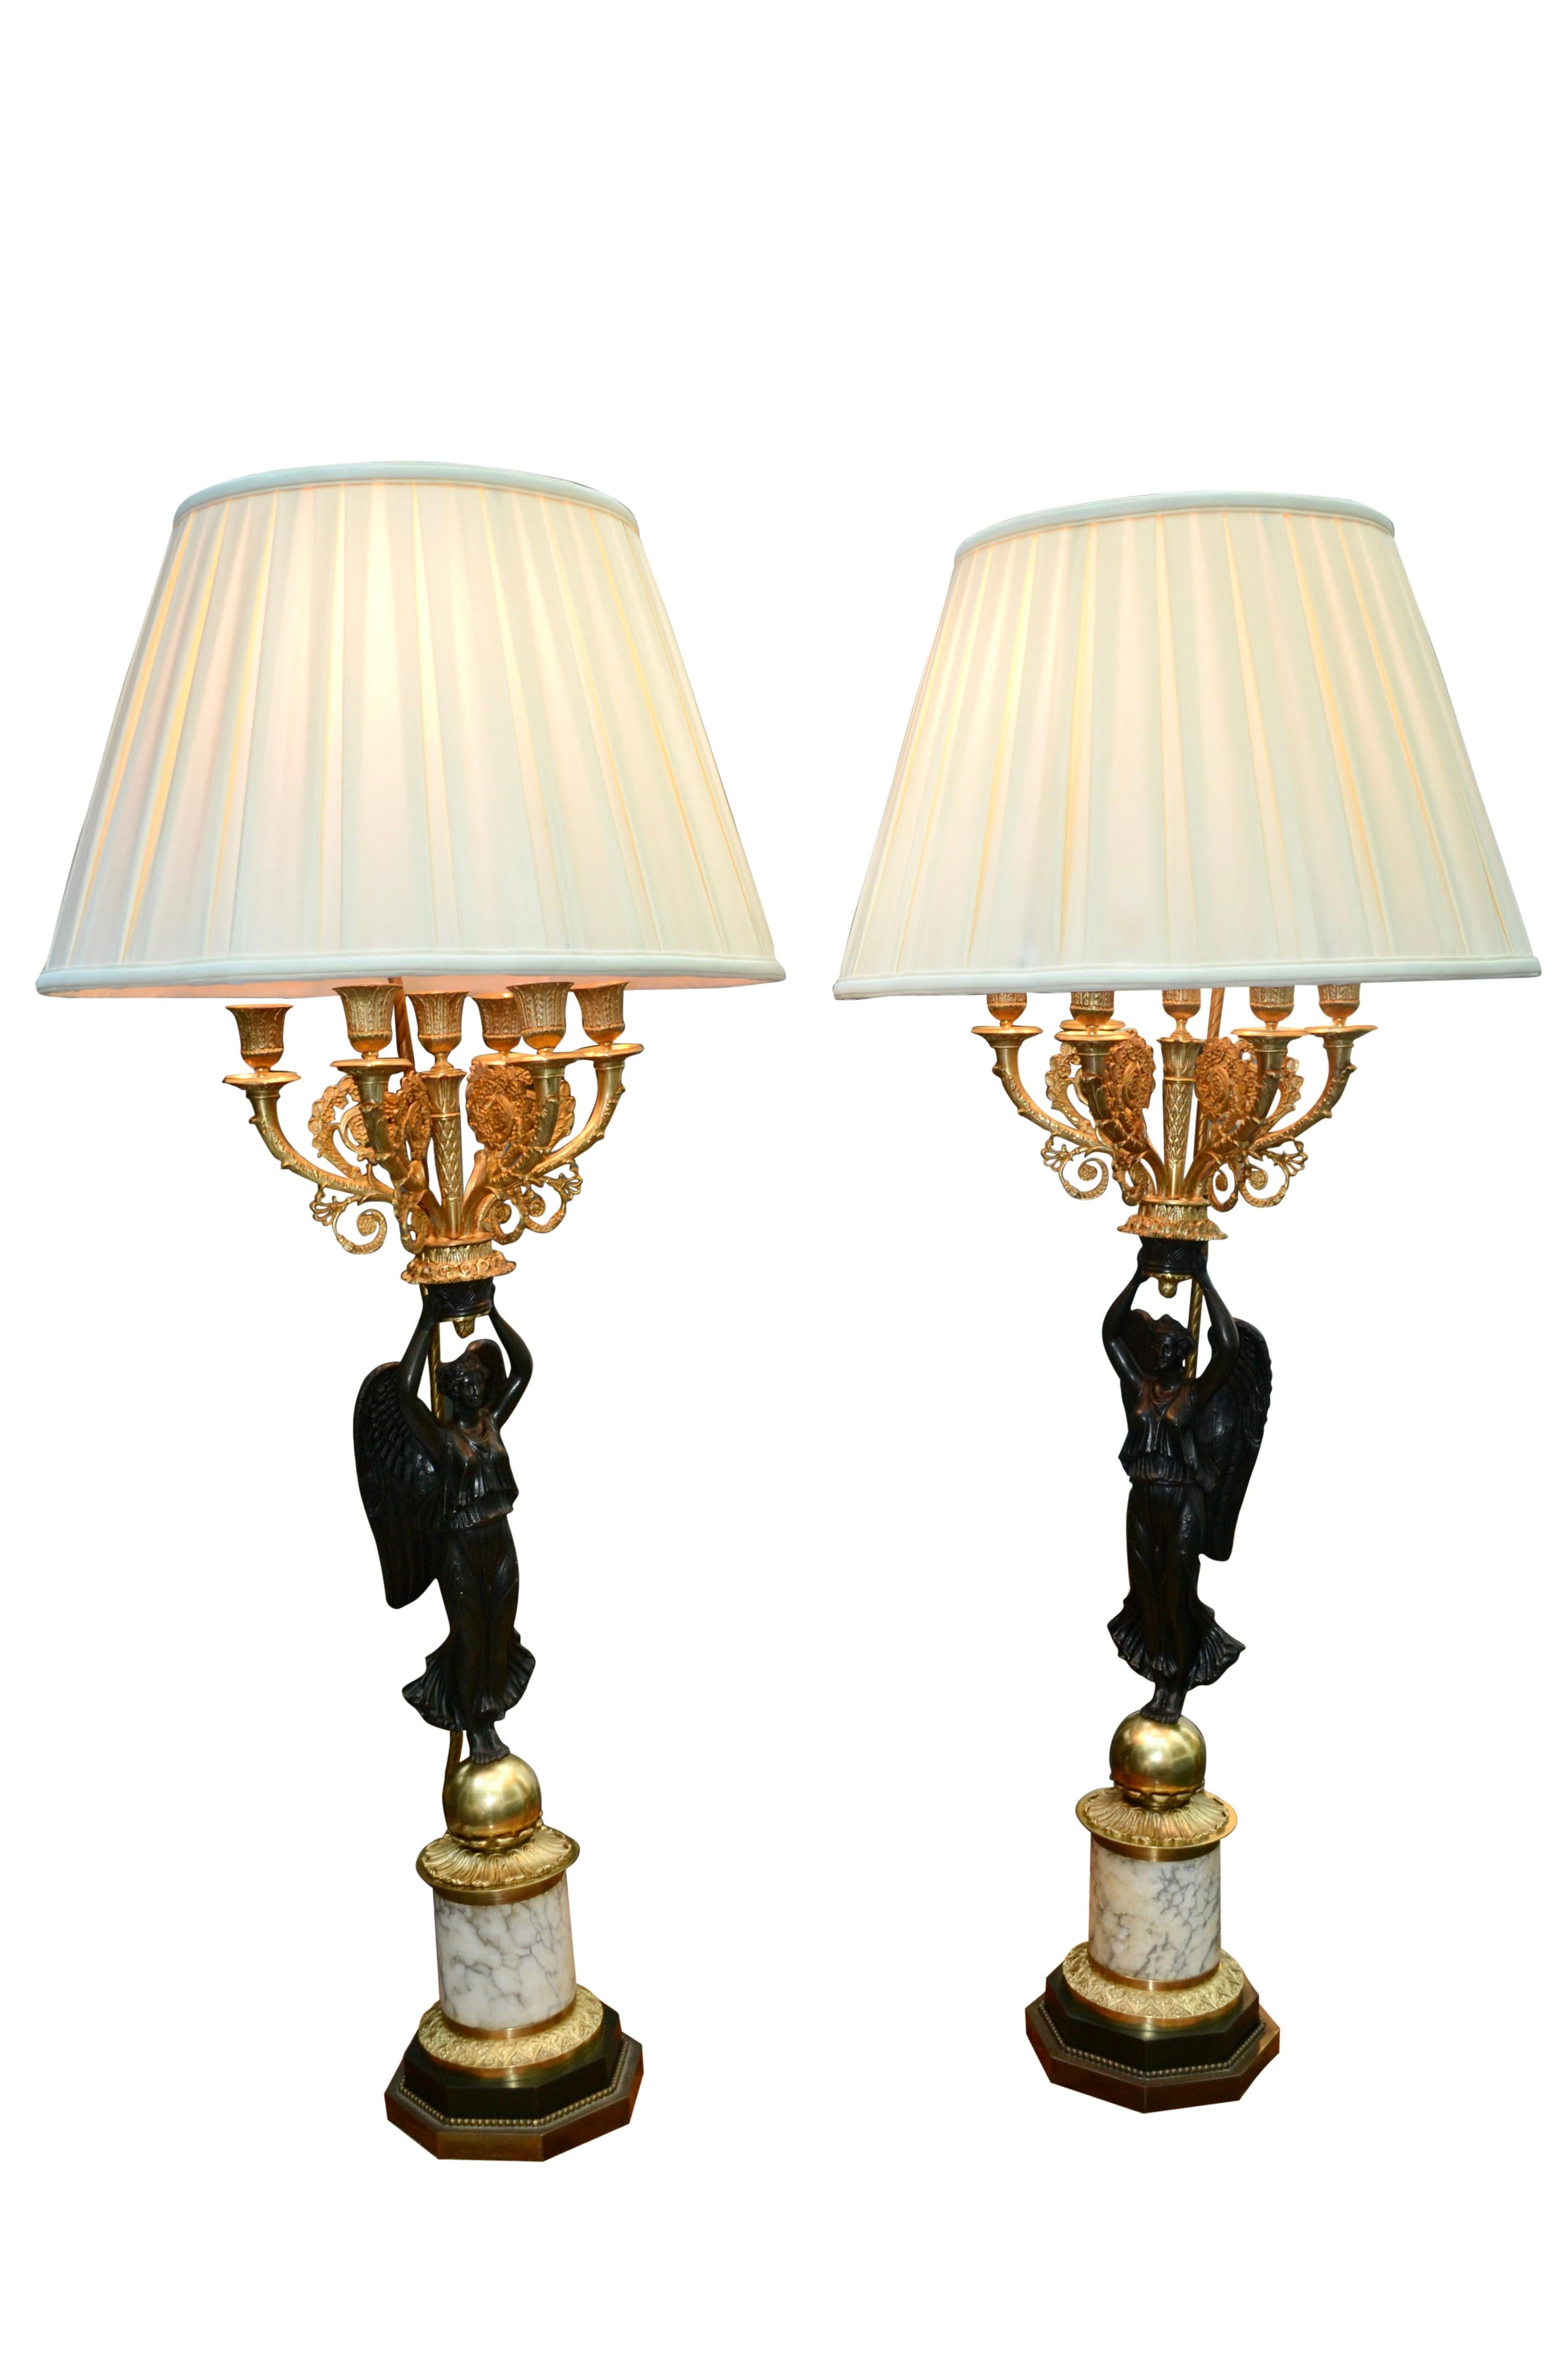 A fine pair of late 19thC French Empire style candelabra now wired into lamps. The very well cast and patinated winged Victory or Nike stands on a gilded ball on a further circular mottled white marble base, the top and bottom with gilded trim. The